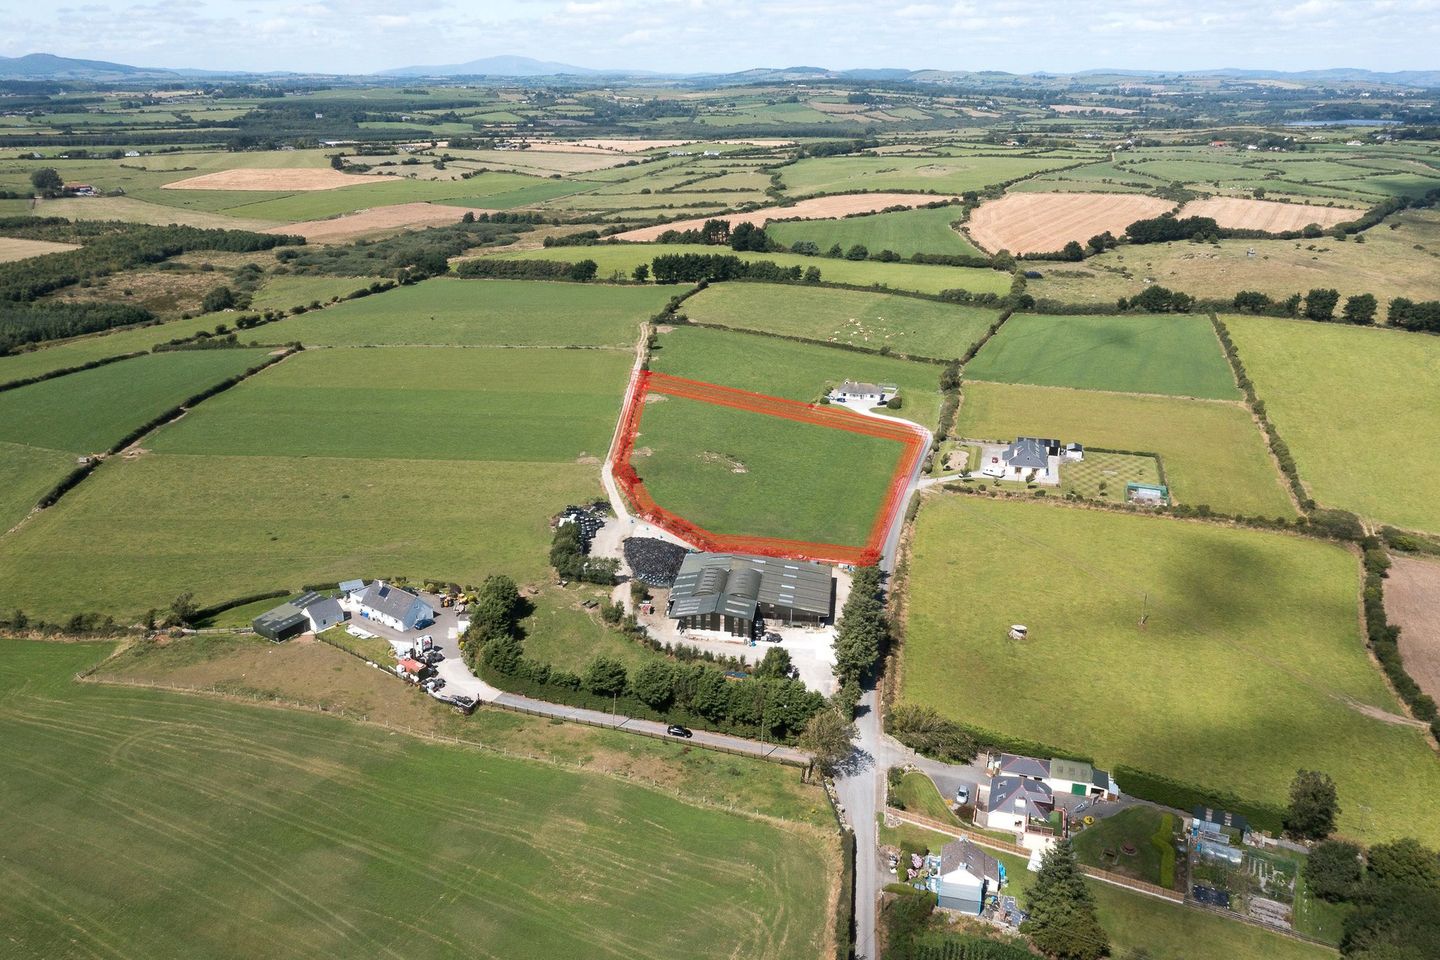 C. 3.7497 Acres Of Land In, Ballinageeragh, Dunhill, Co. Waterford